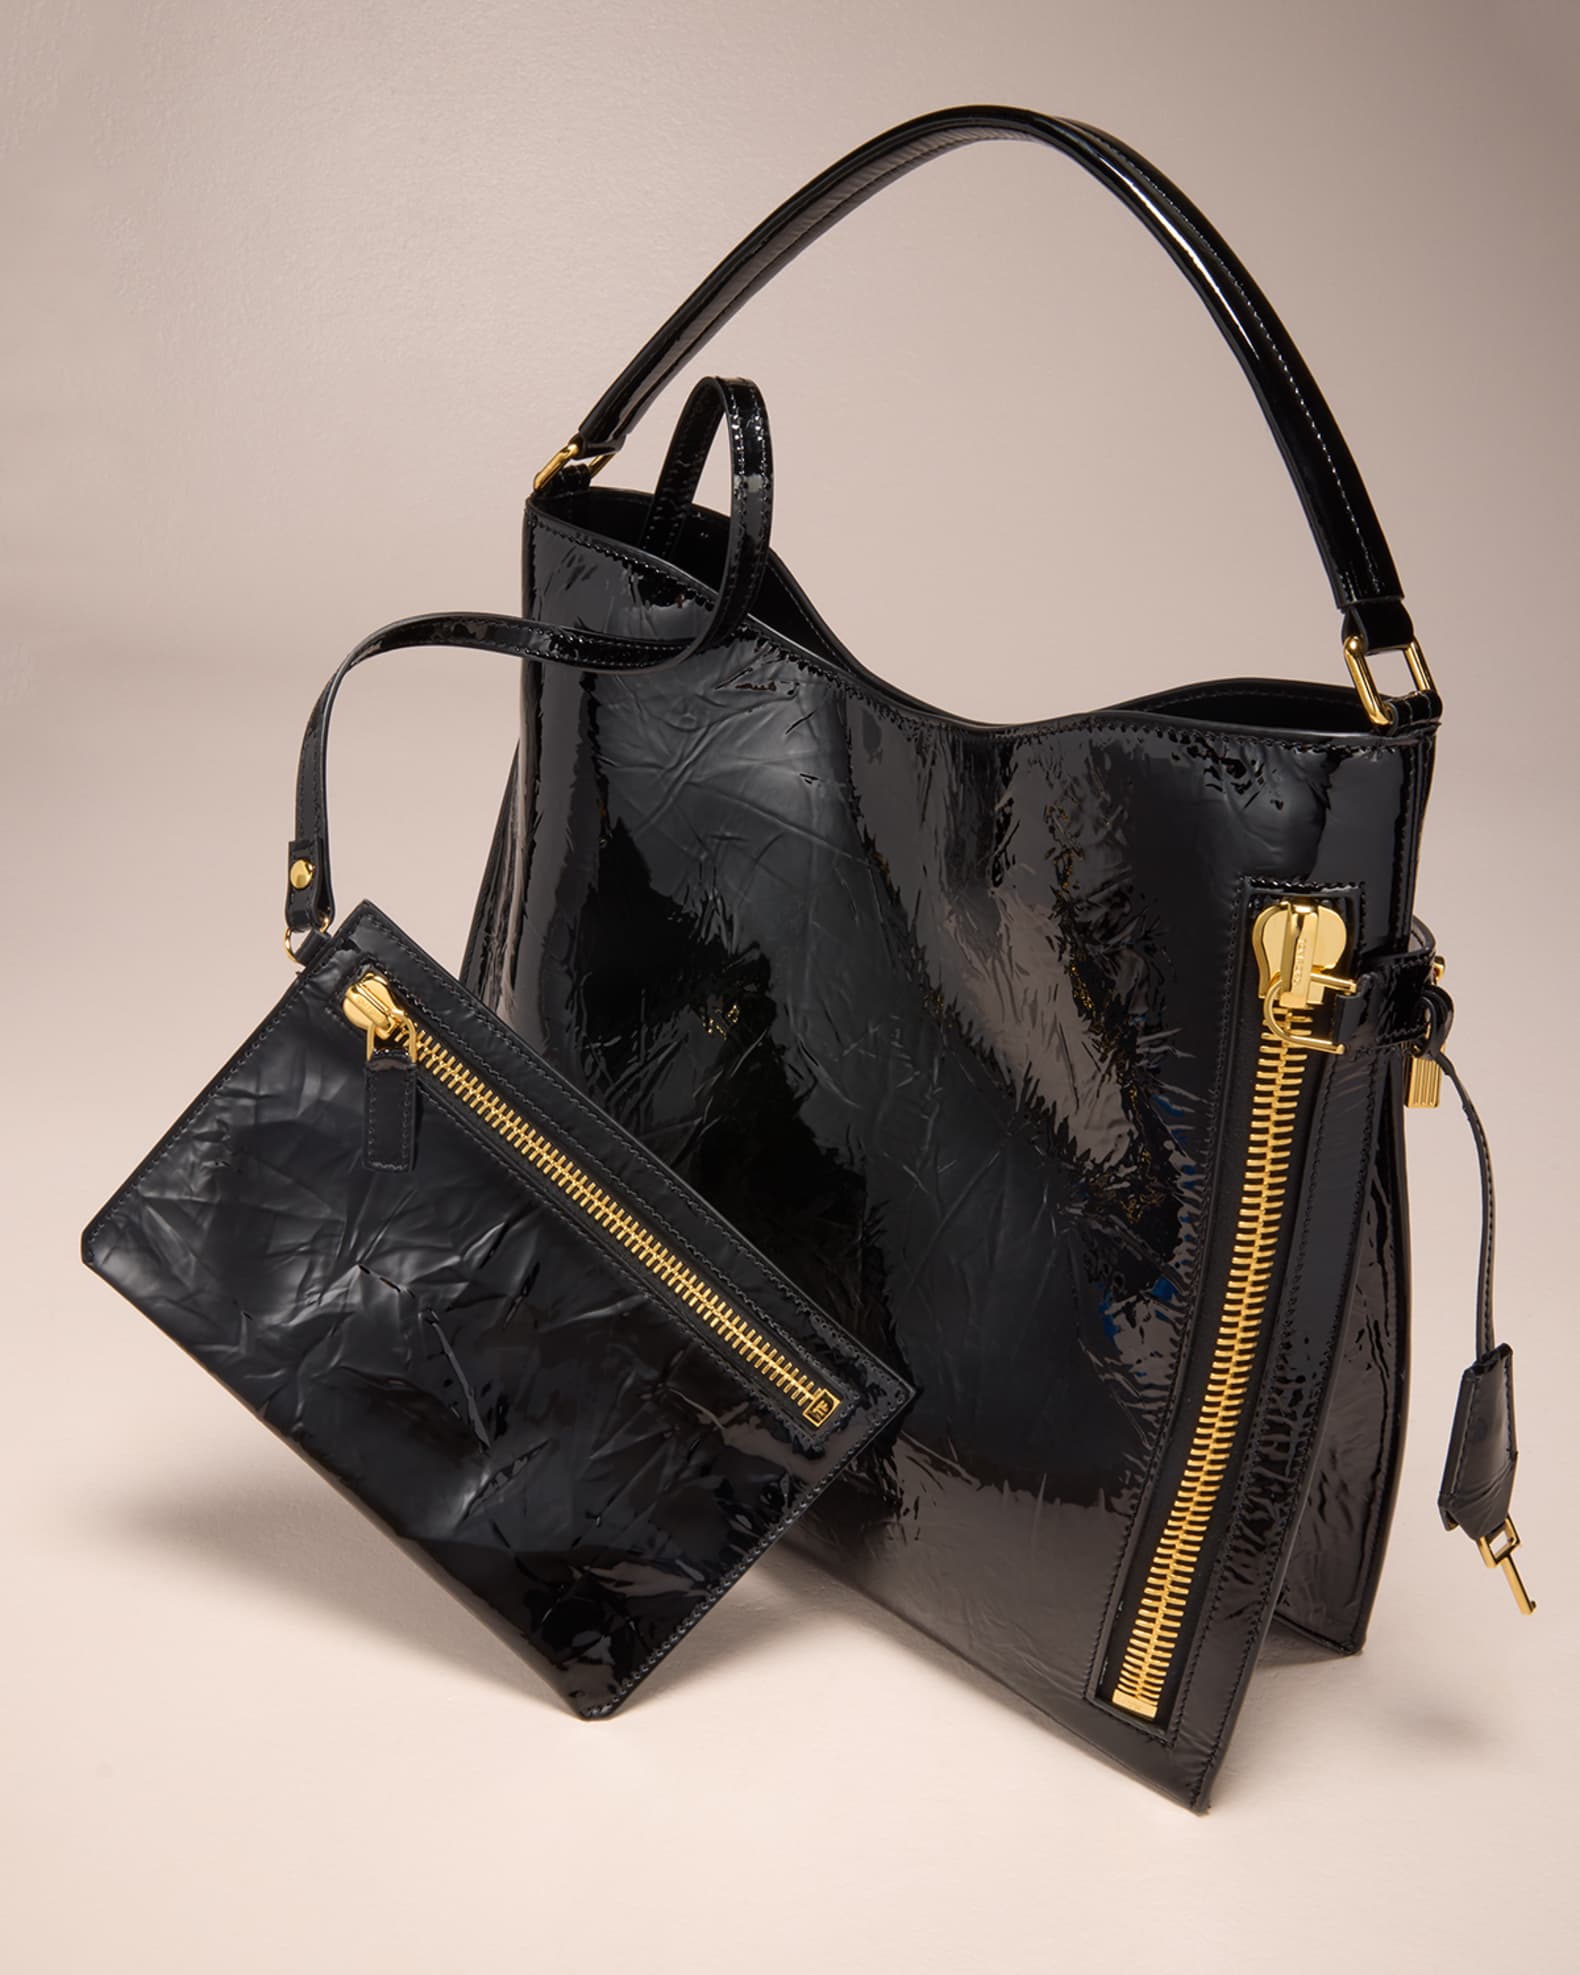 Tom Ford Small Crinkled Patent-leather Bag - Black